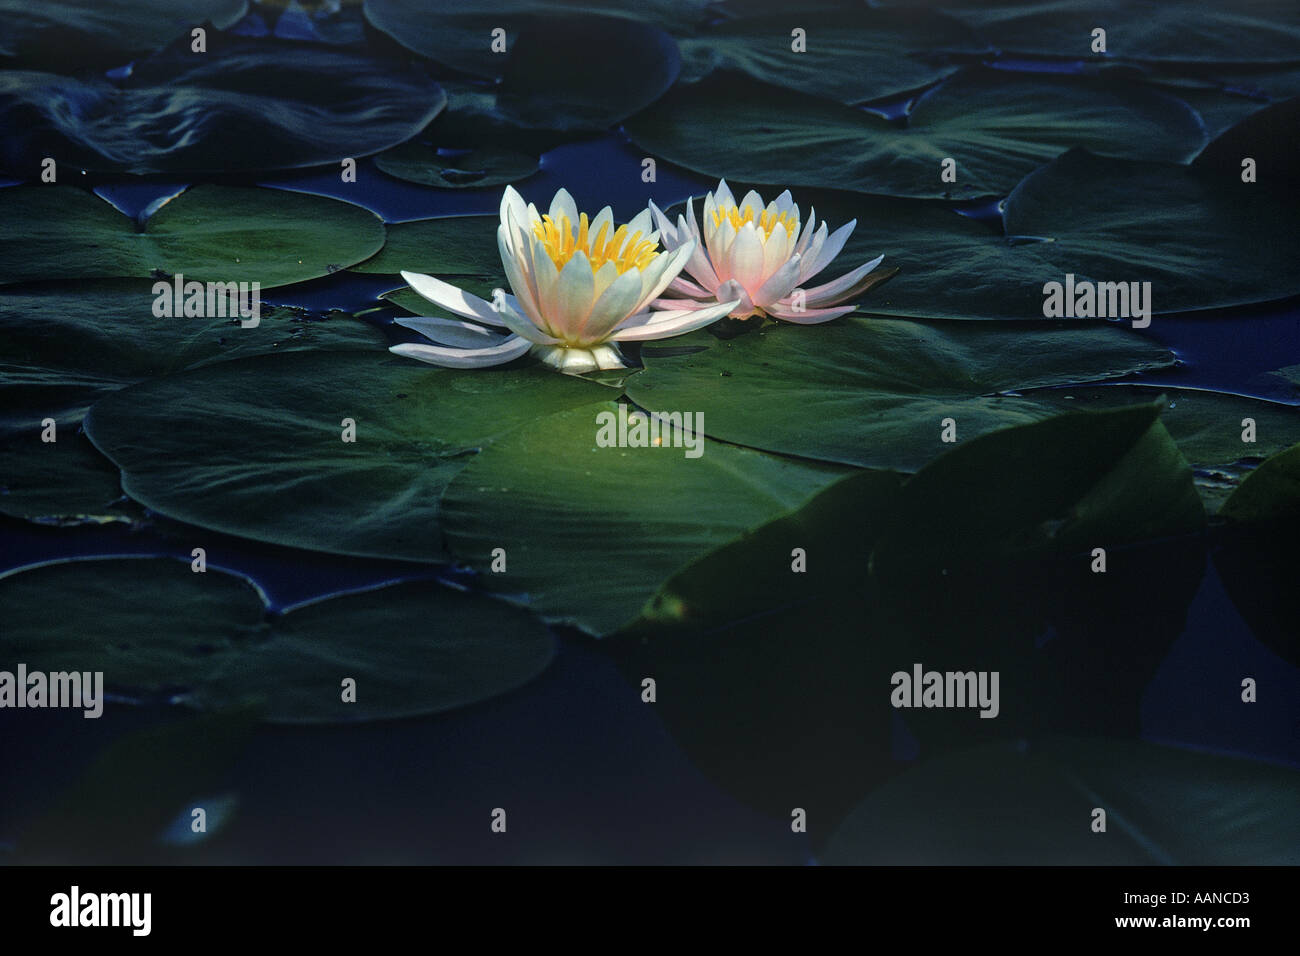 White water lilies and pads on surface of inland pond in sunlight Stock Photo